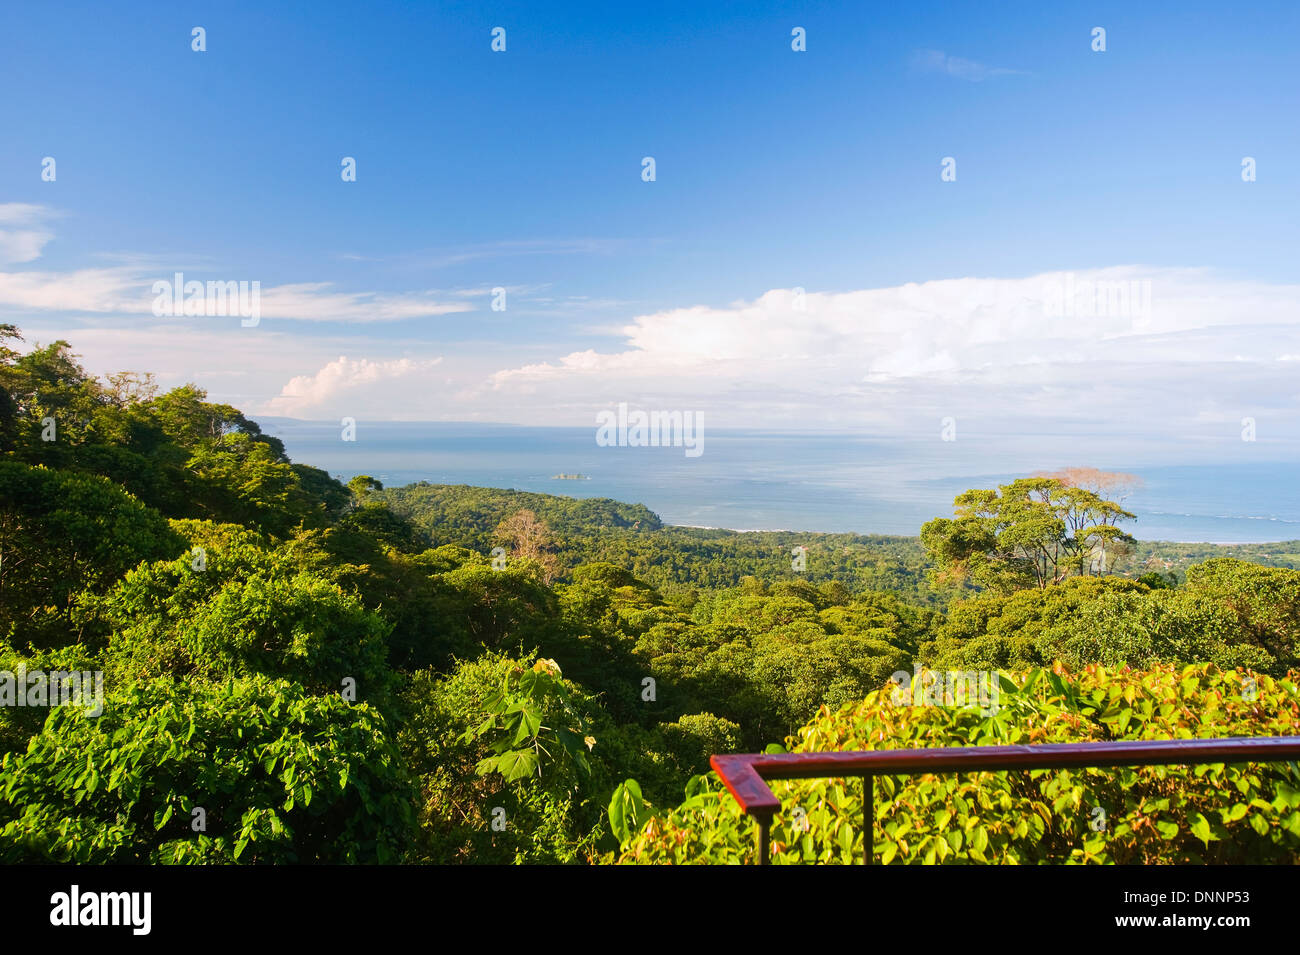 View of the Pacific Ocean from Rancho Pacifico, Costa Rica Stock Photo